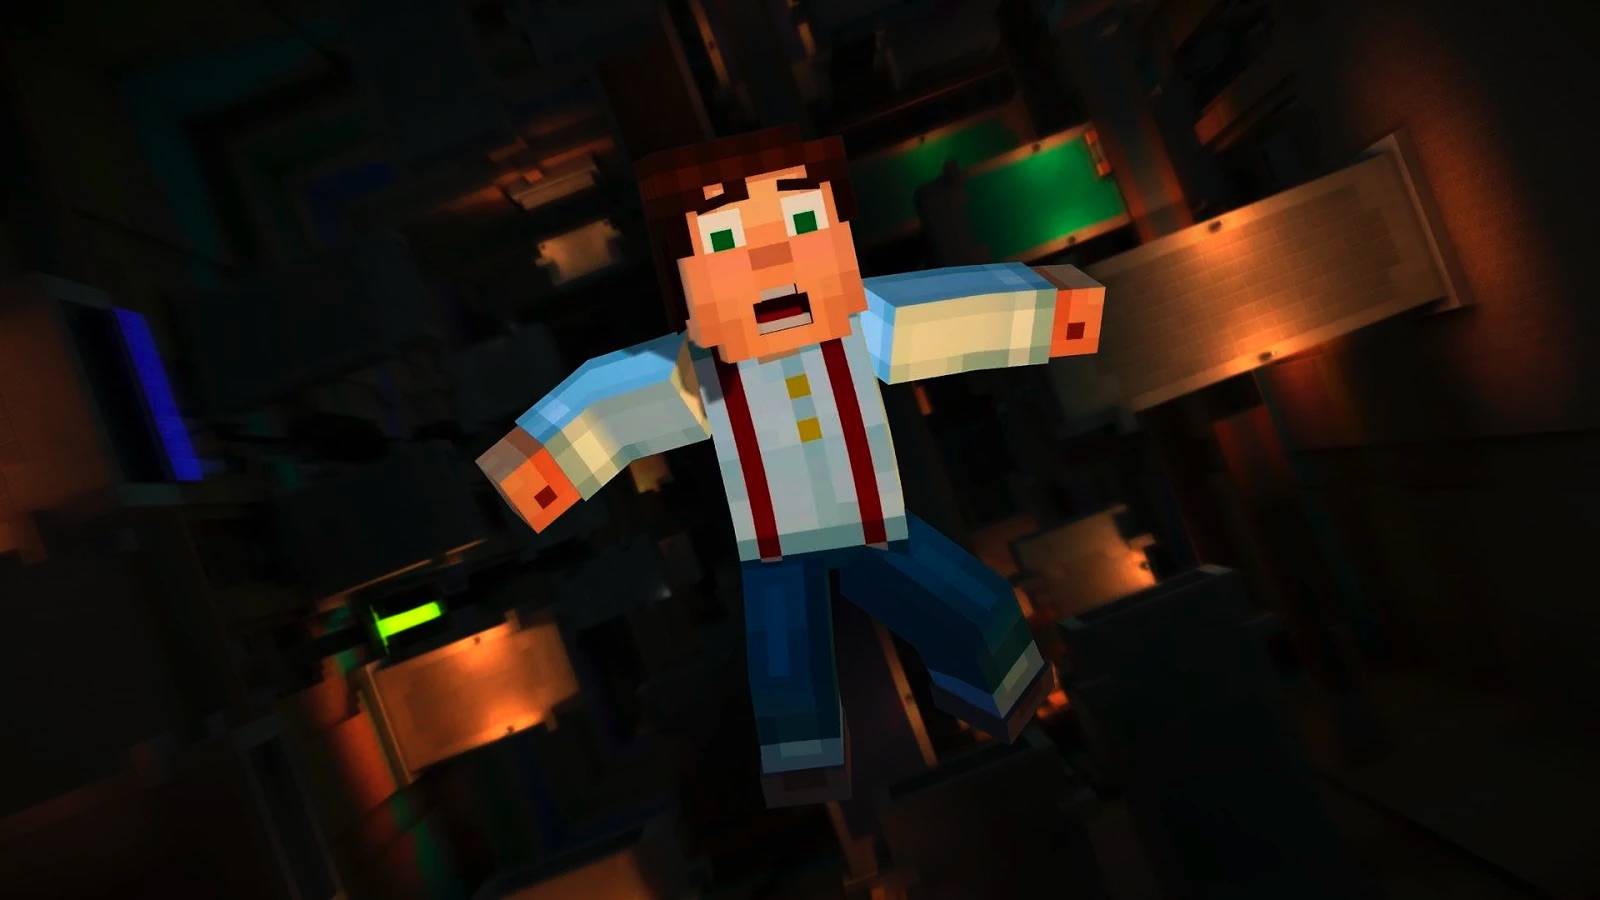 Minecraft: Story Mode's seventh episode rolls out next week - Polygon